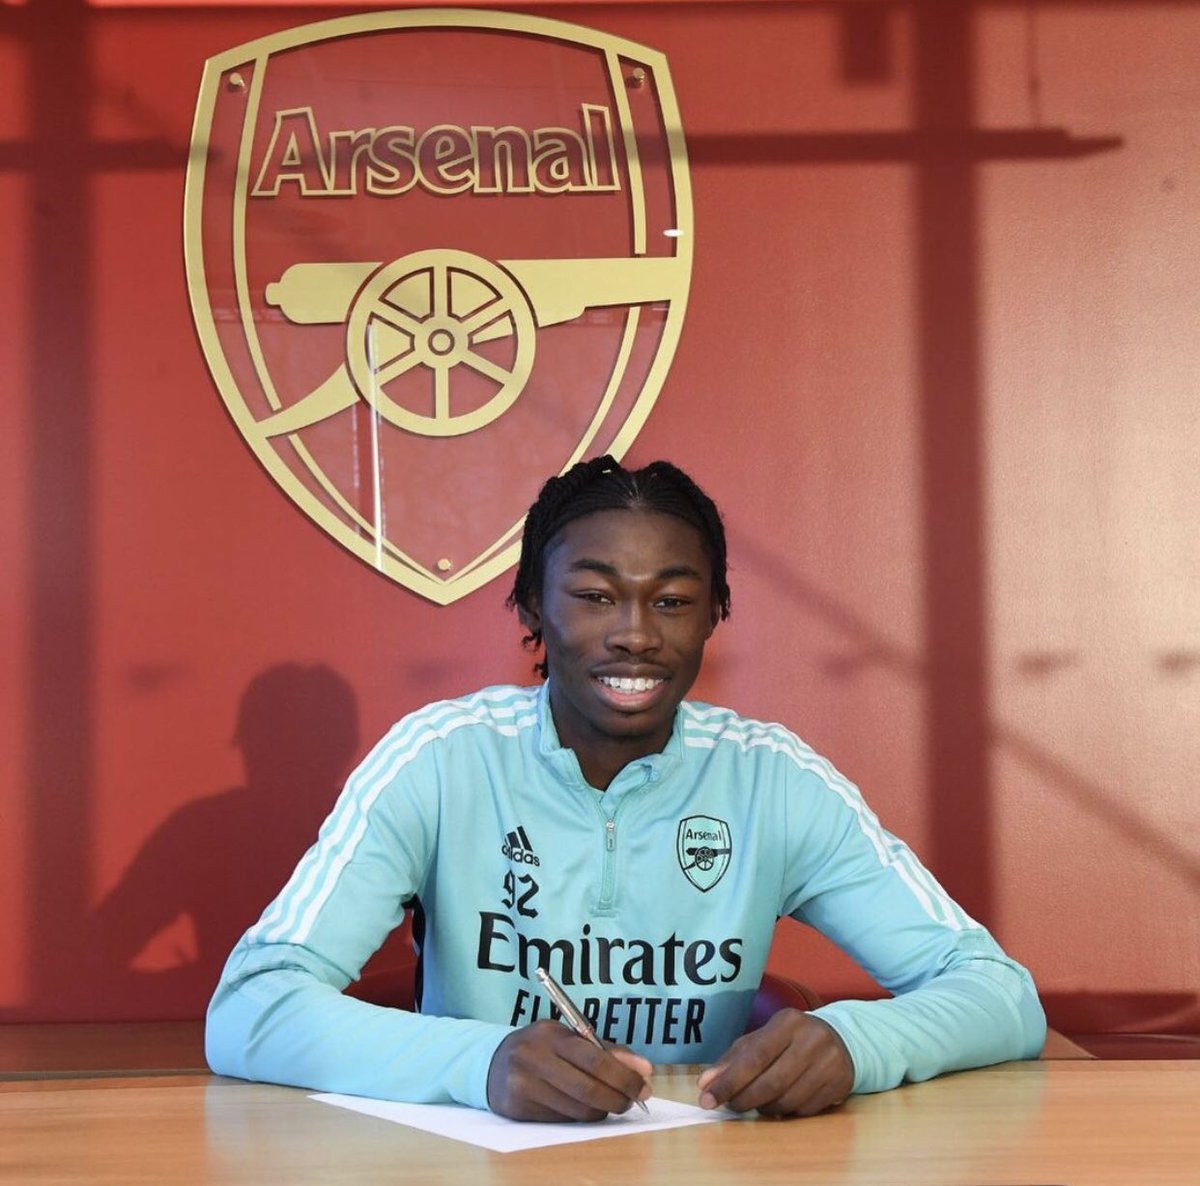 Massive congratulations to former Glebe youth player Henry “Timi” Davies who has signed his first professional contract with Arsenal ✍️ Timi was with us for one season at U13’s before signing for Manchester City (He joined Arsenal towards the end of last season) 1/2